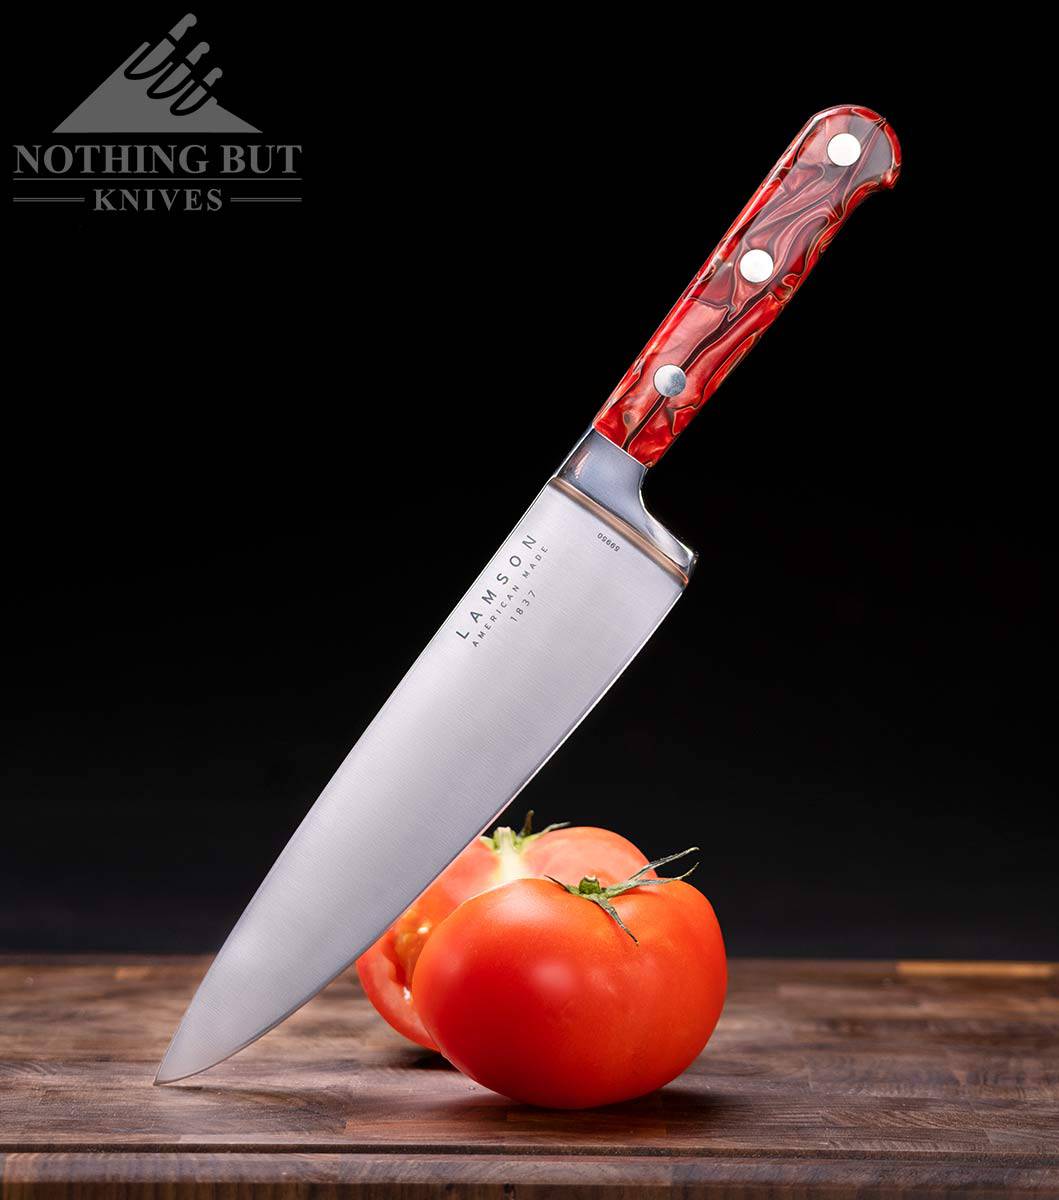 The Lamson 8 inch Premier chef knife is a decent alternative to the Buck 931. It is pictured here with a sliced tomato on a cutting board. 